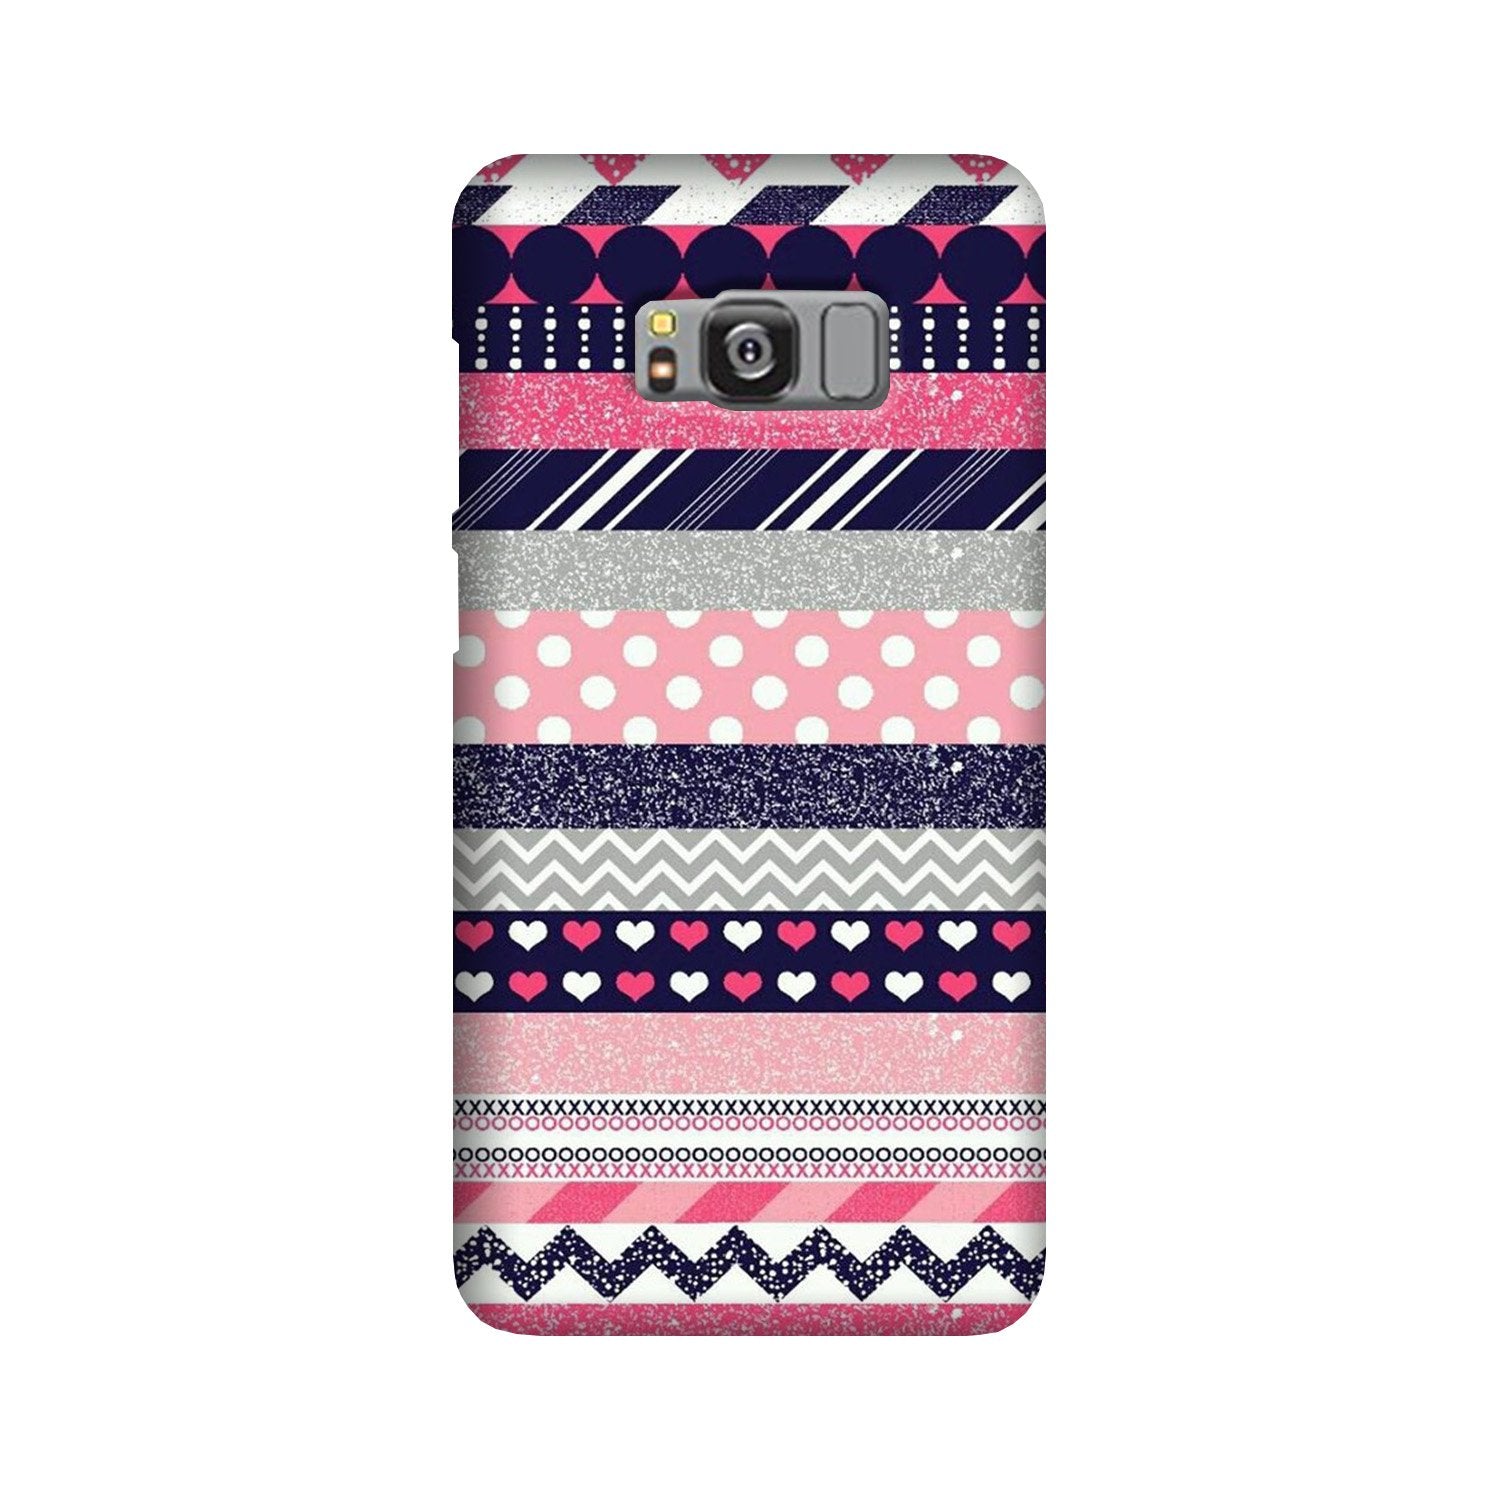 Pattern3 Case for Galaxy S8